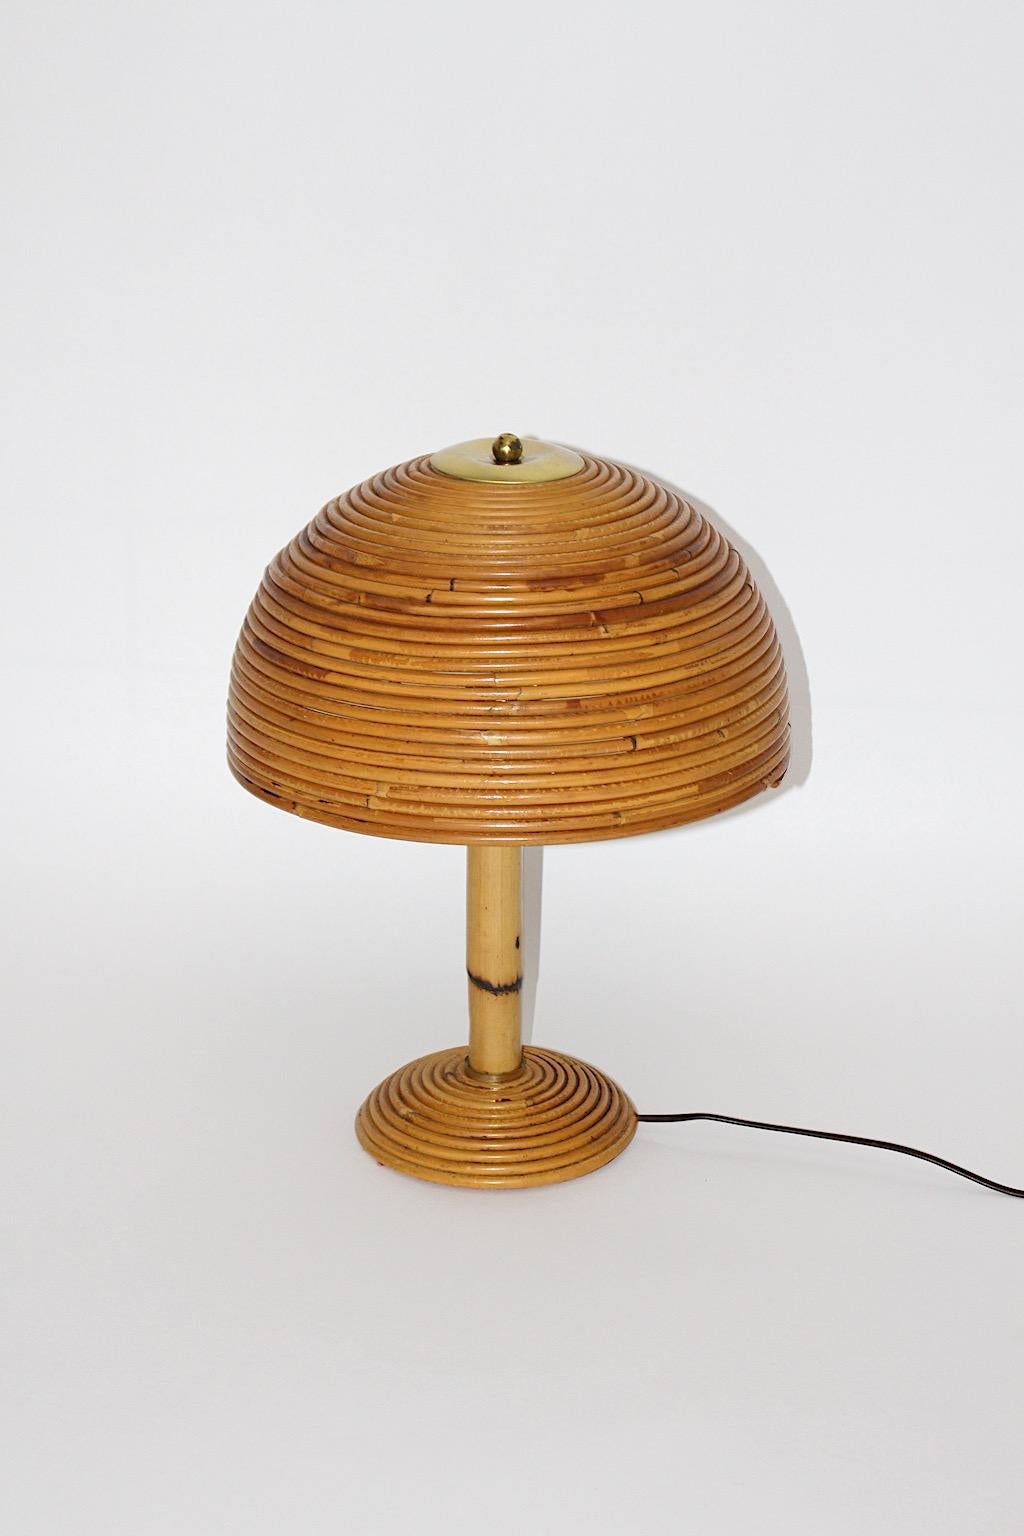 Organic modern vintage table lamp mushroom like from rattan and brass Italy, 1970s.
A beautiful lamp shade mushroom like shows rattan work and brass details, the stem from bamboo features lively play from structure.
One E 27 socket and on / off